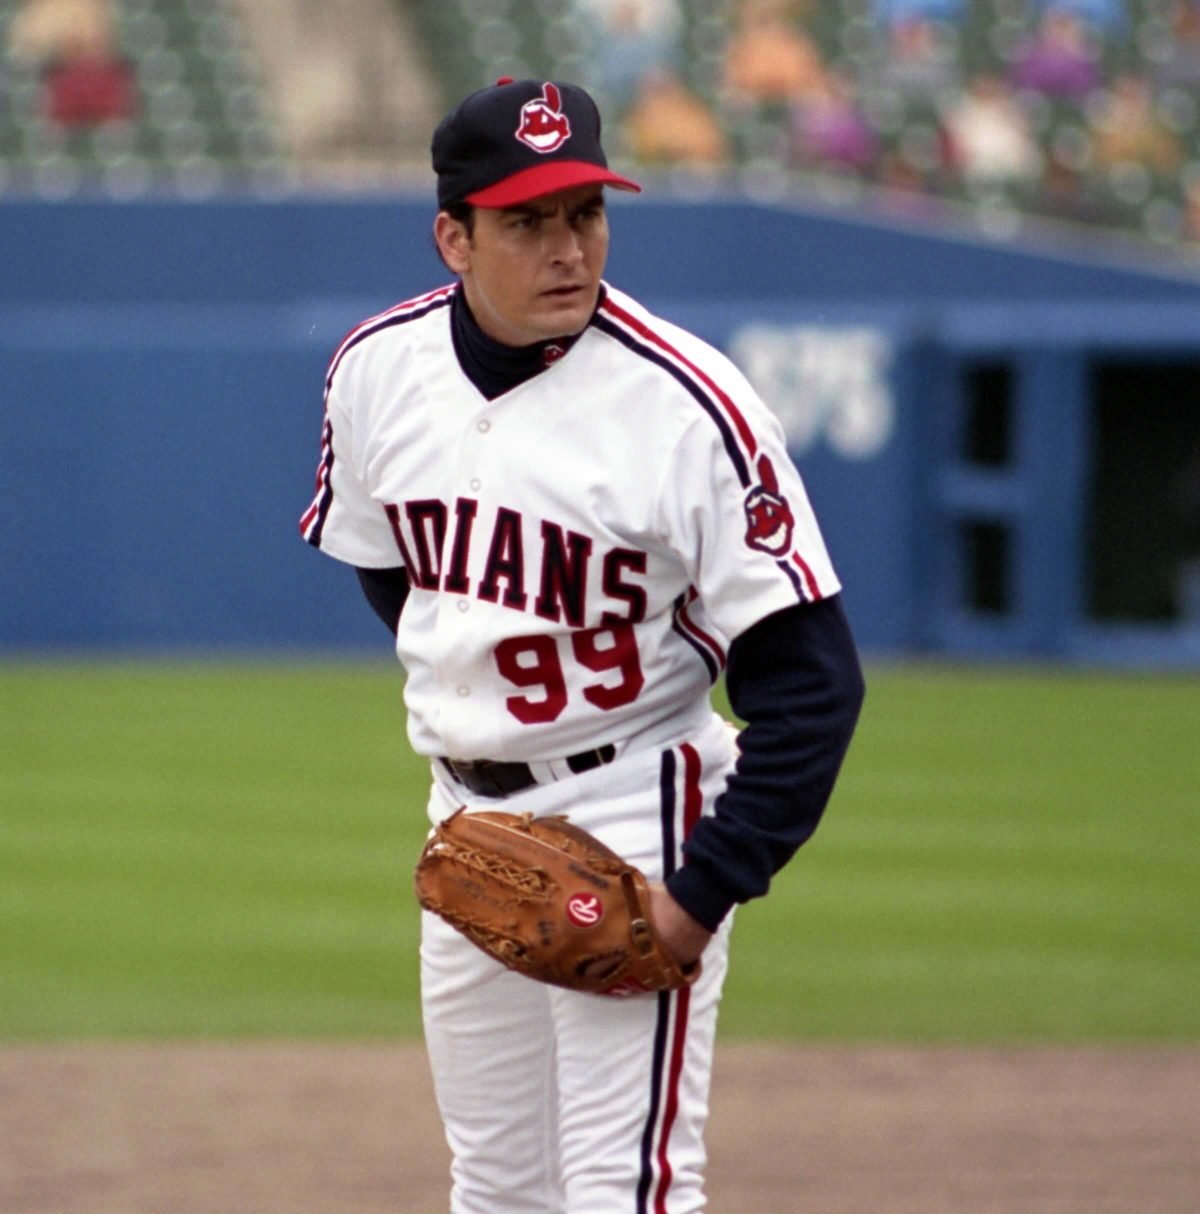 Charlie Sheen as Rick Wild Thing Vaughn of the Cleveland Indians